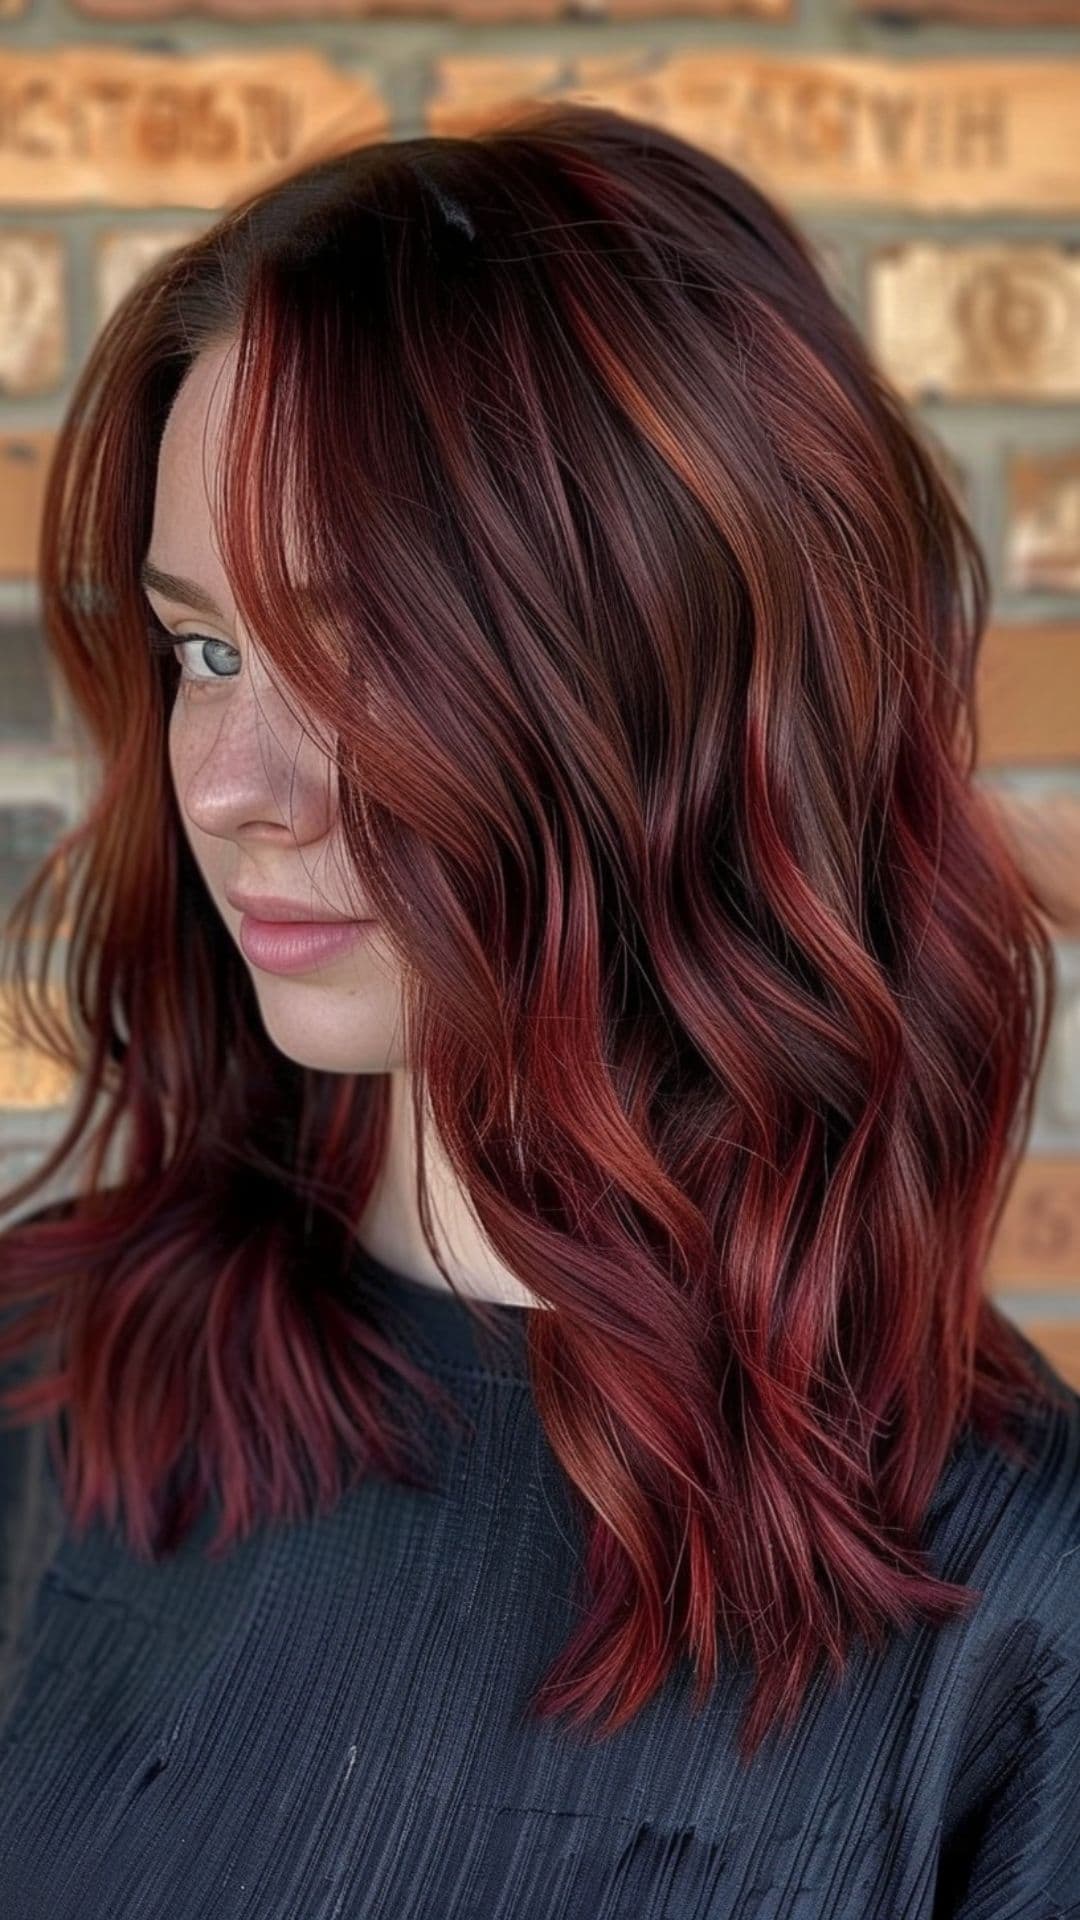 A woman modelling a burgundy and scarlet highlights.